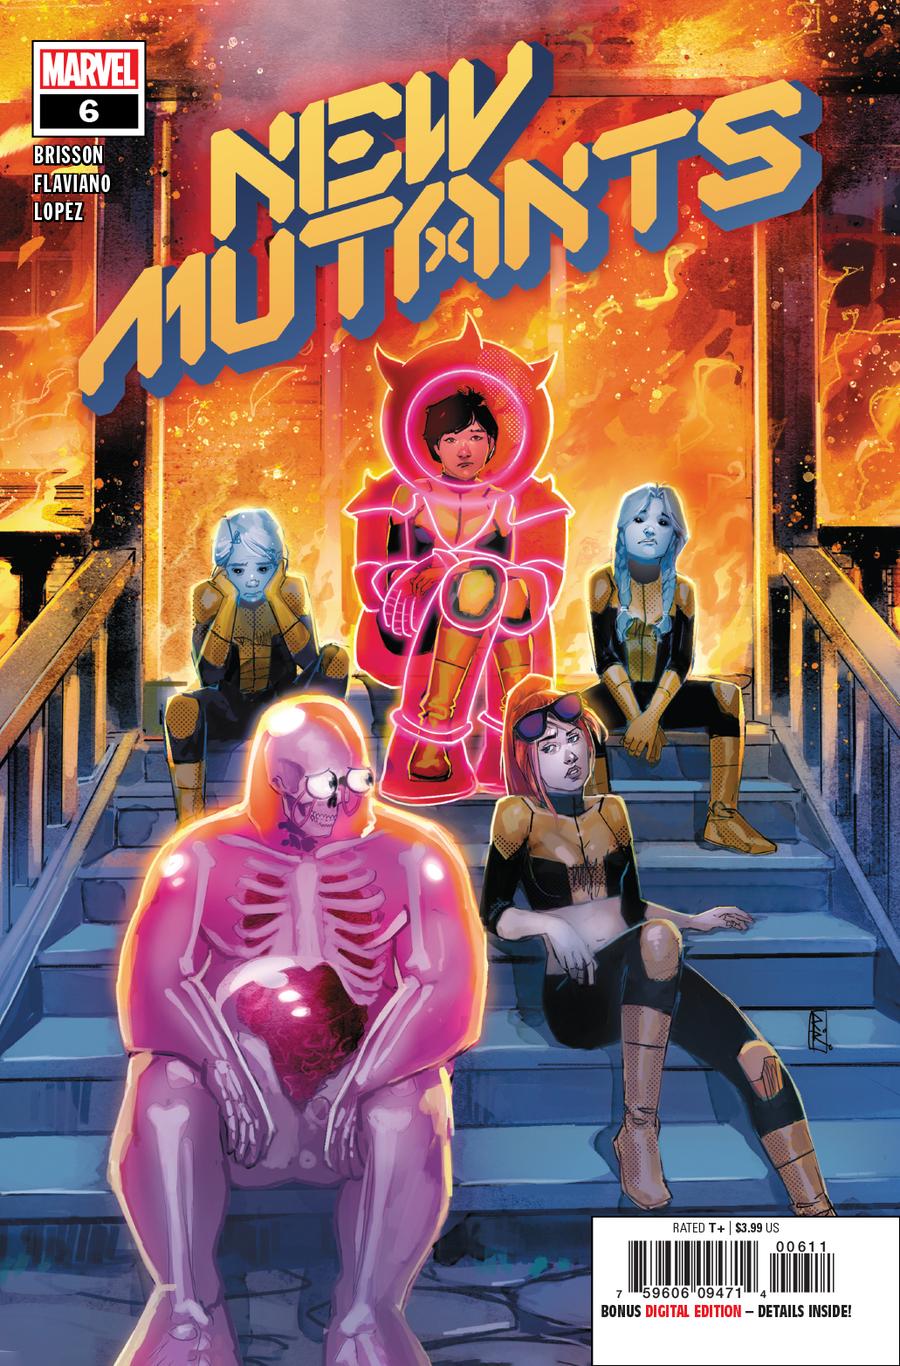 New Mutants Vol 4 #6 Cover A Regular Rod Reis Cover (Dawn Of X Tie-In)